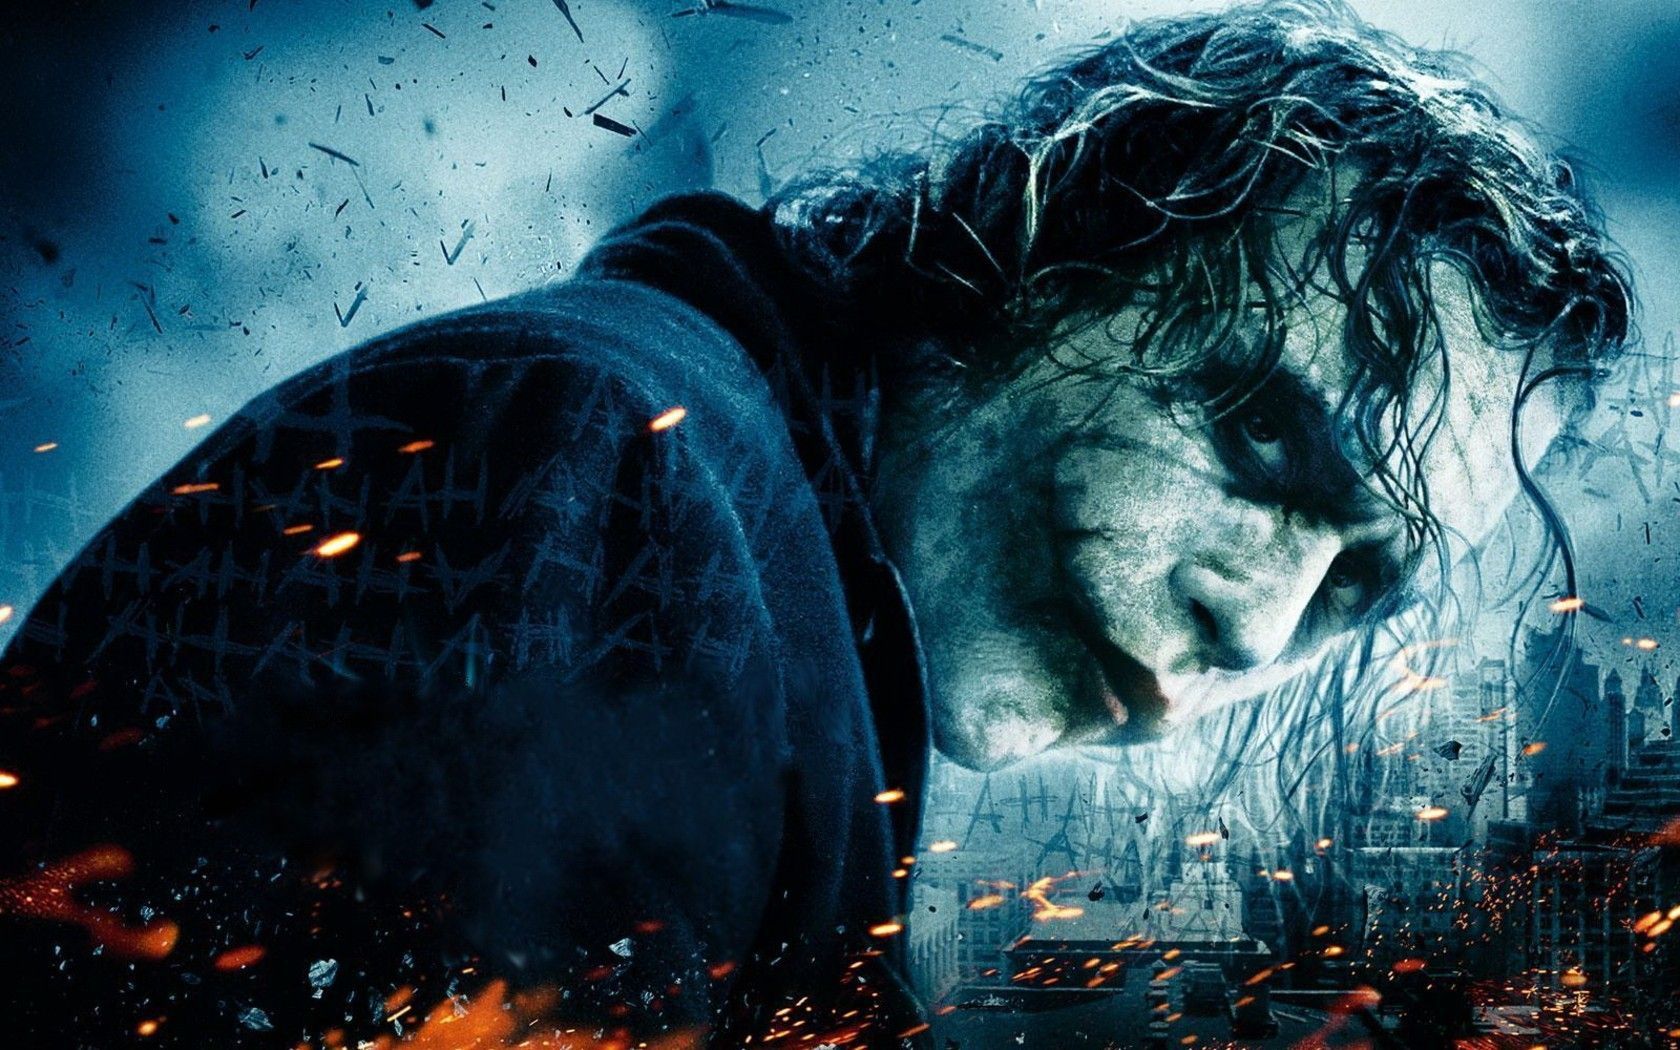 Dark Knight Movie HD Wallpaper And Movie Images, New Backgrounds